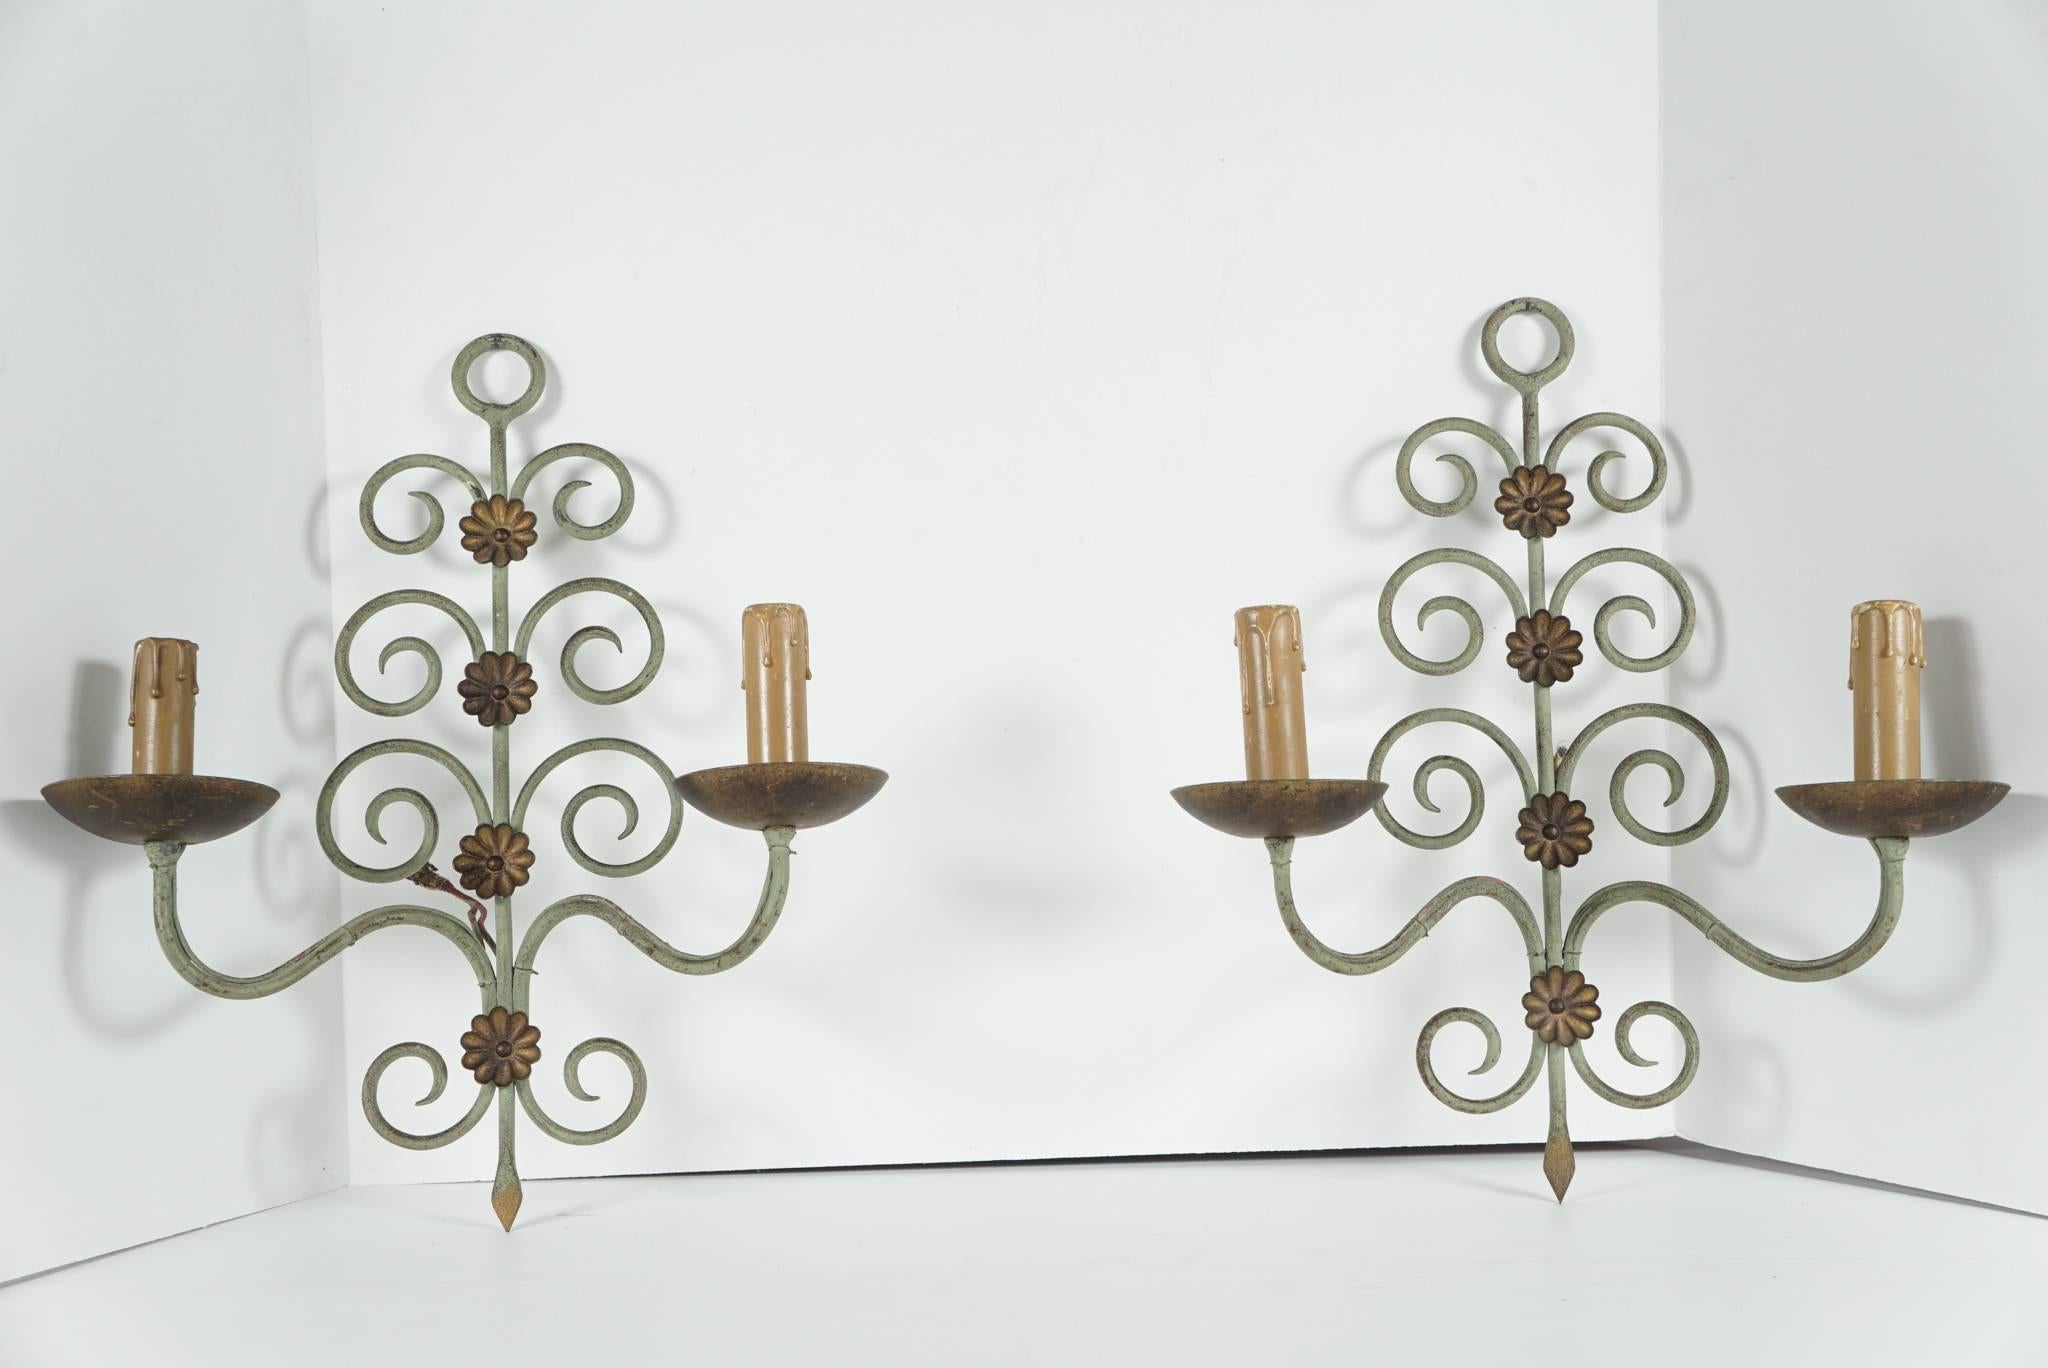 This pair of French Art Moderne two-light scones are made of wrought iron and are painted in a sage green with gold highlights from the 1940s. Totally hand-forged but manufactured to exacting standards in a modern taste they retain original details